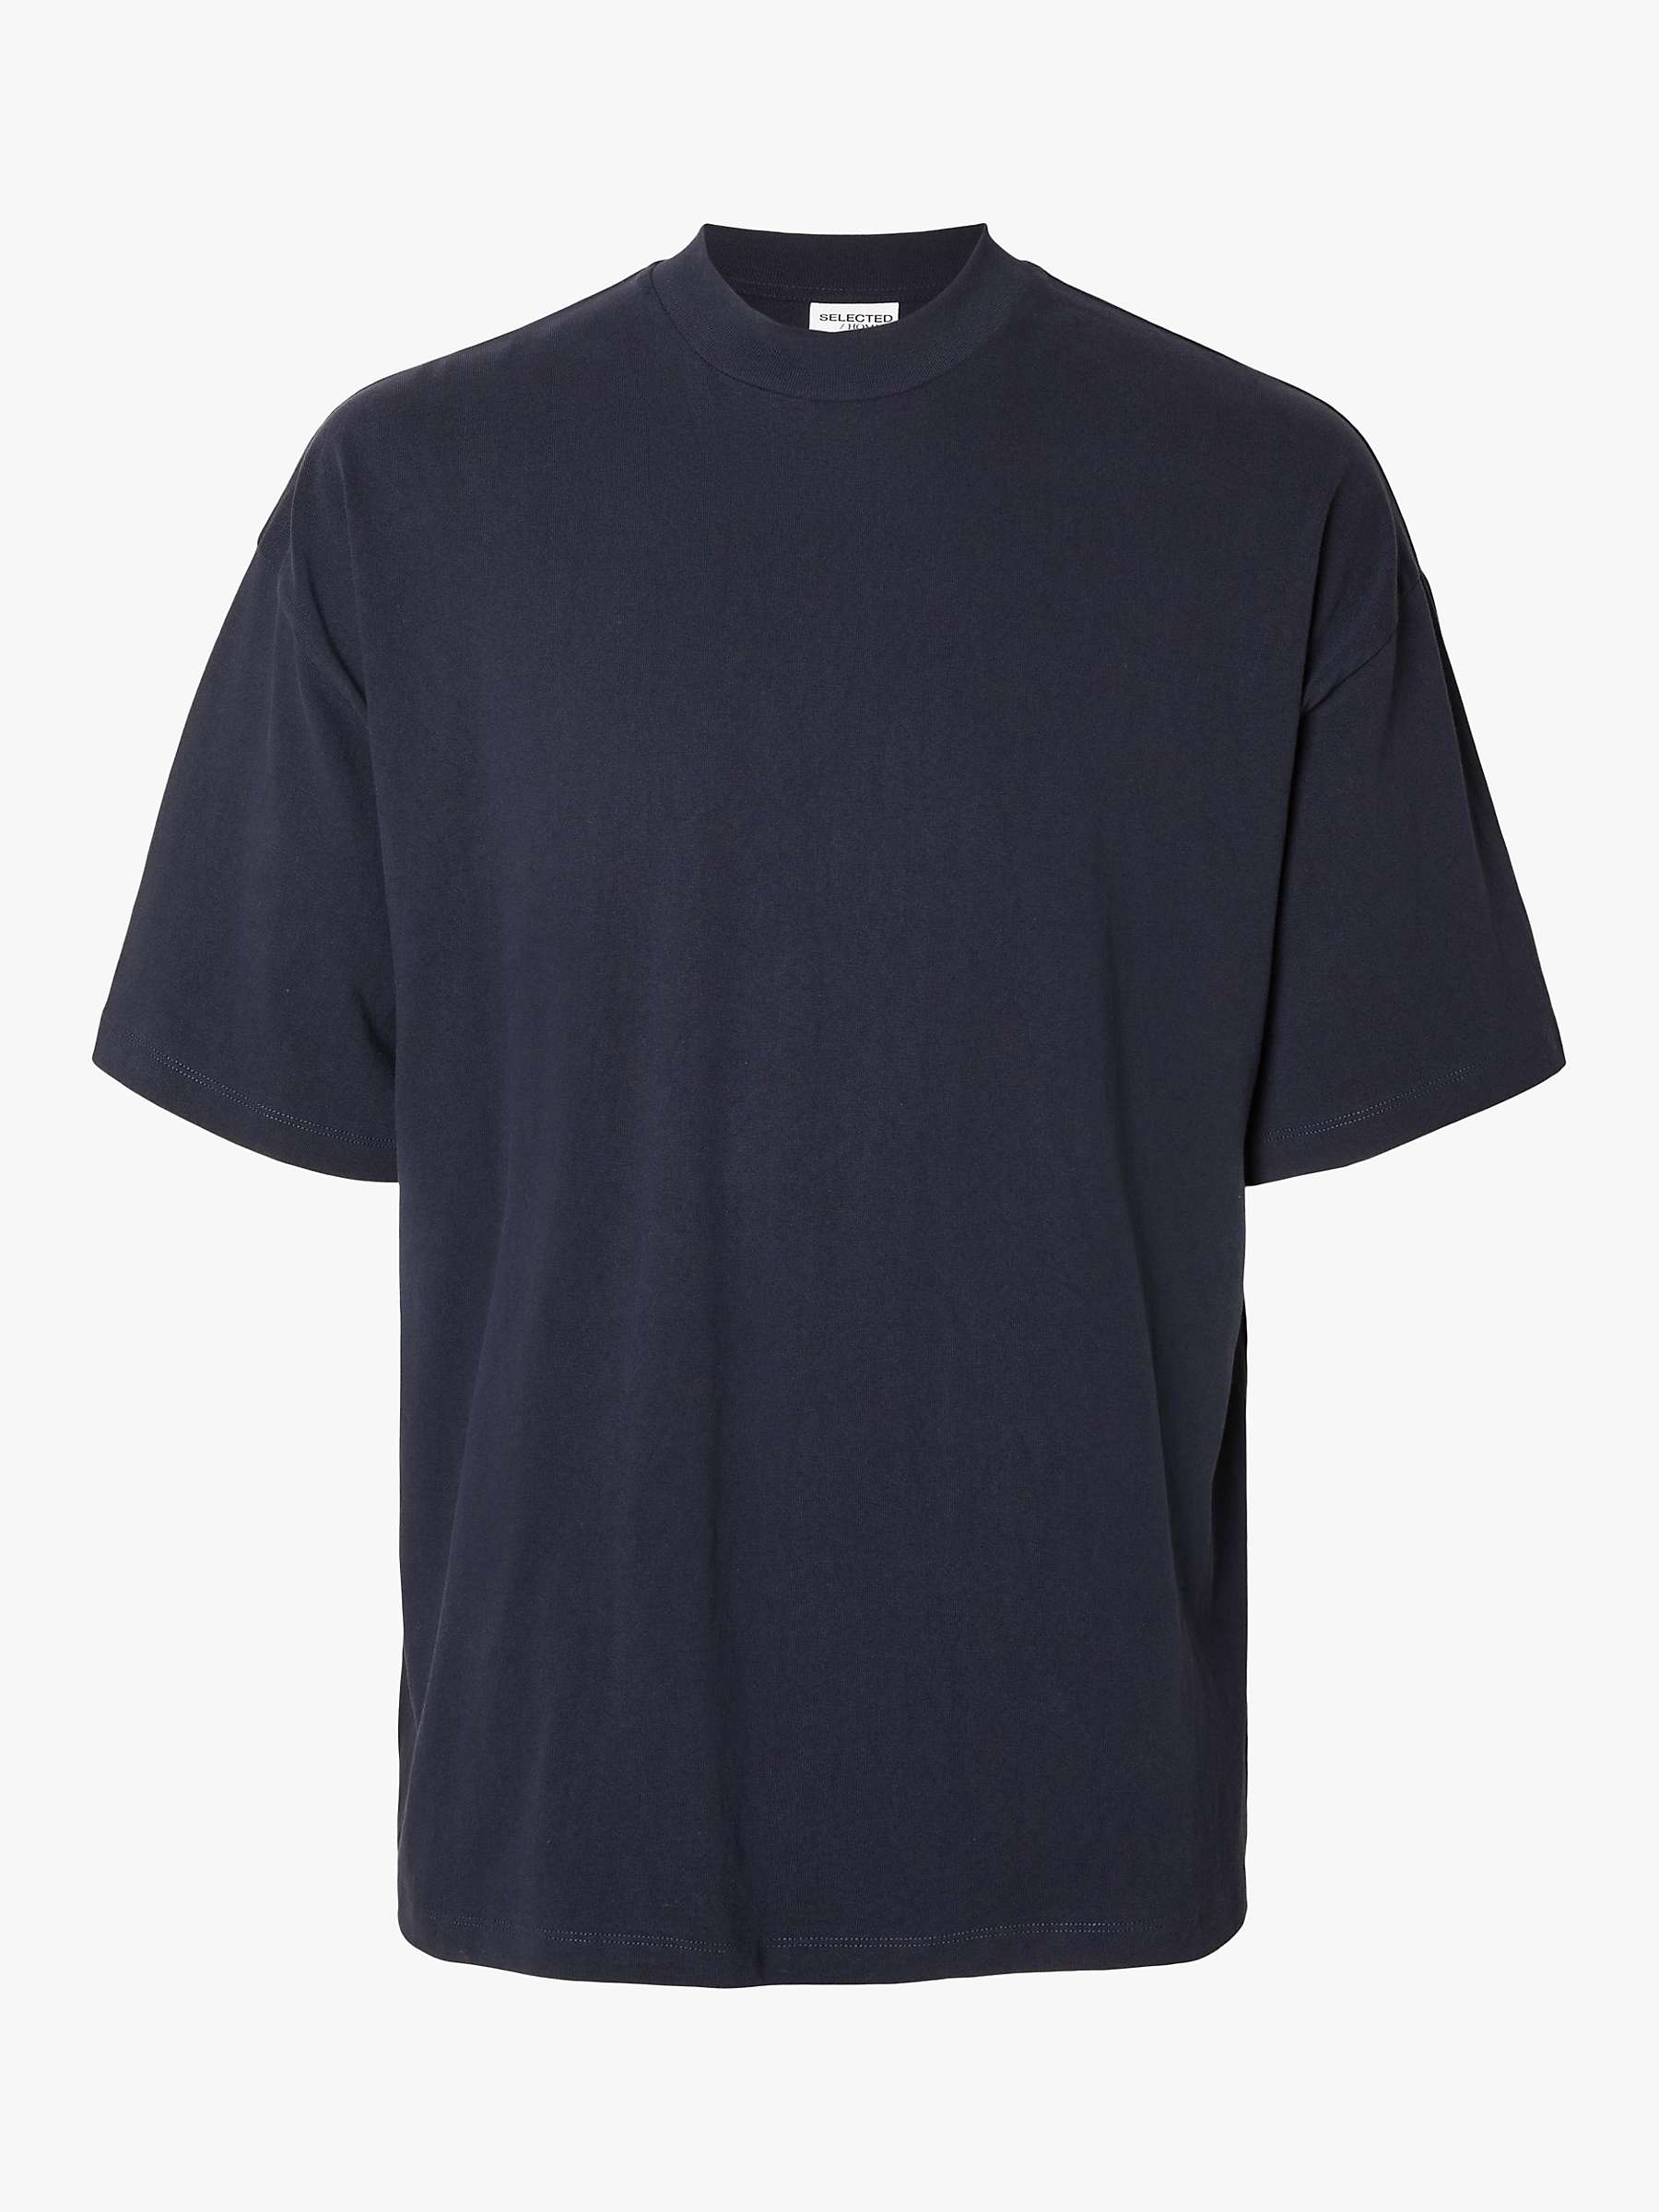 Buy SELECTED HOMME Organic Cotton Blend Essential T-Shirt, Sky Captain Online at johnlewis.com